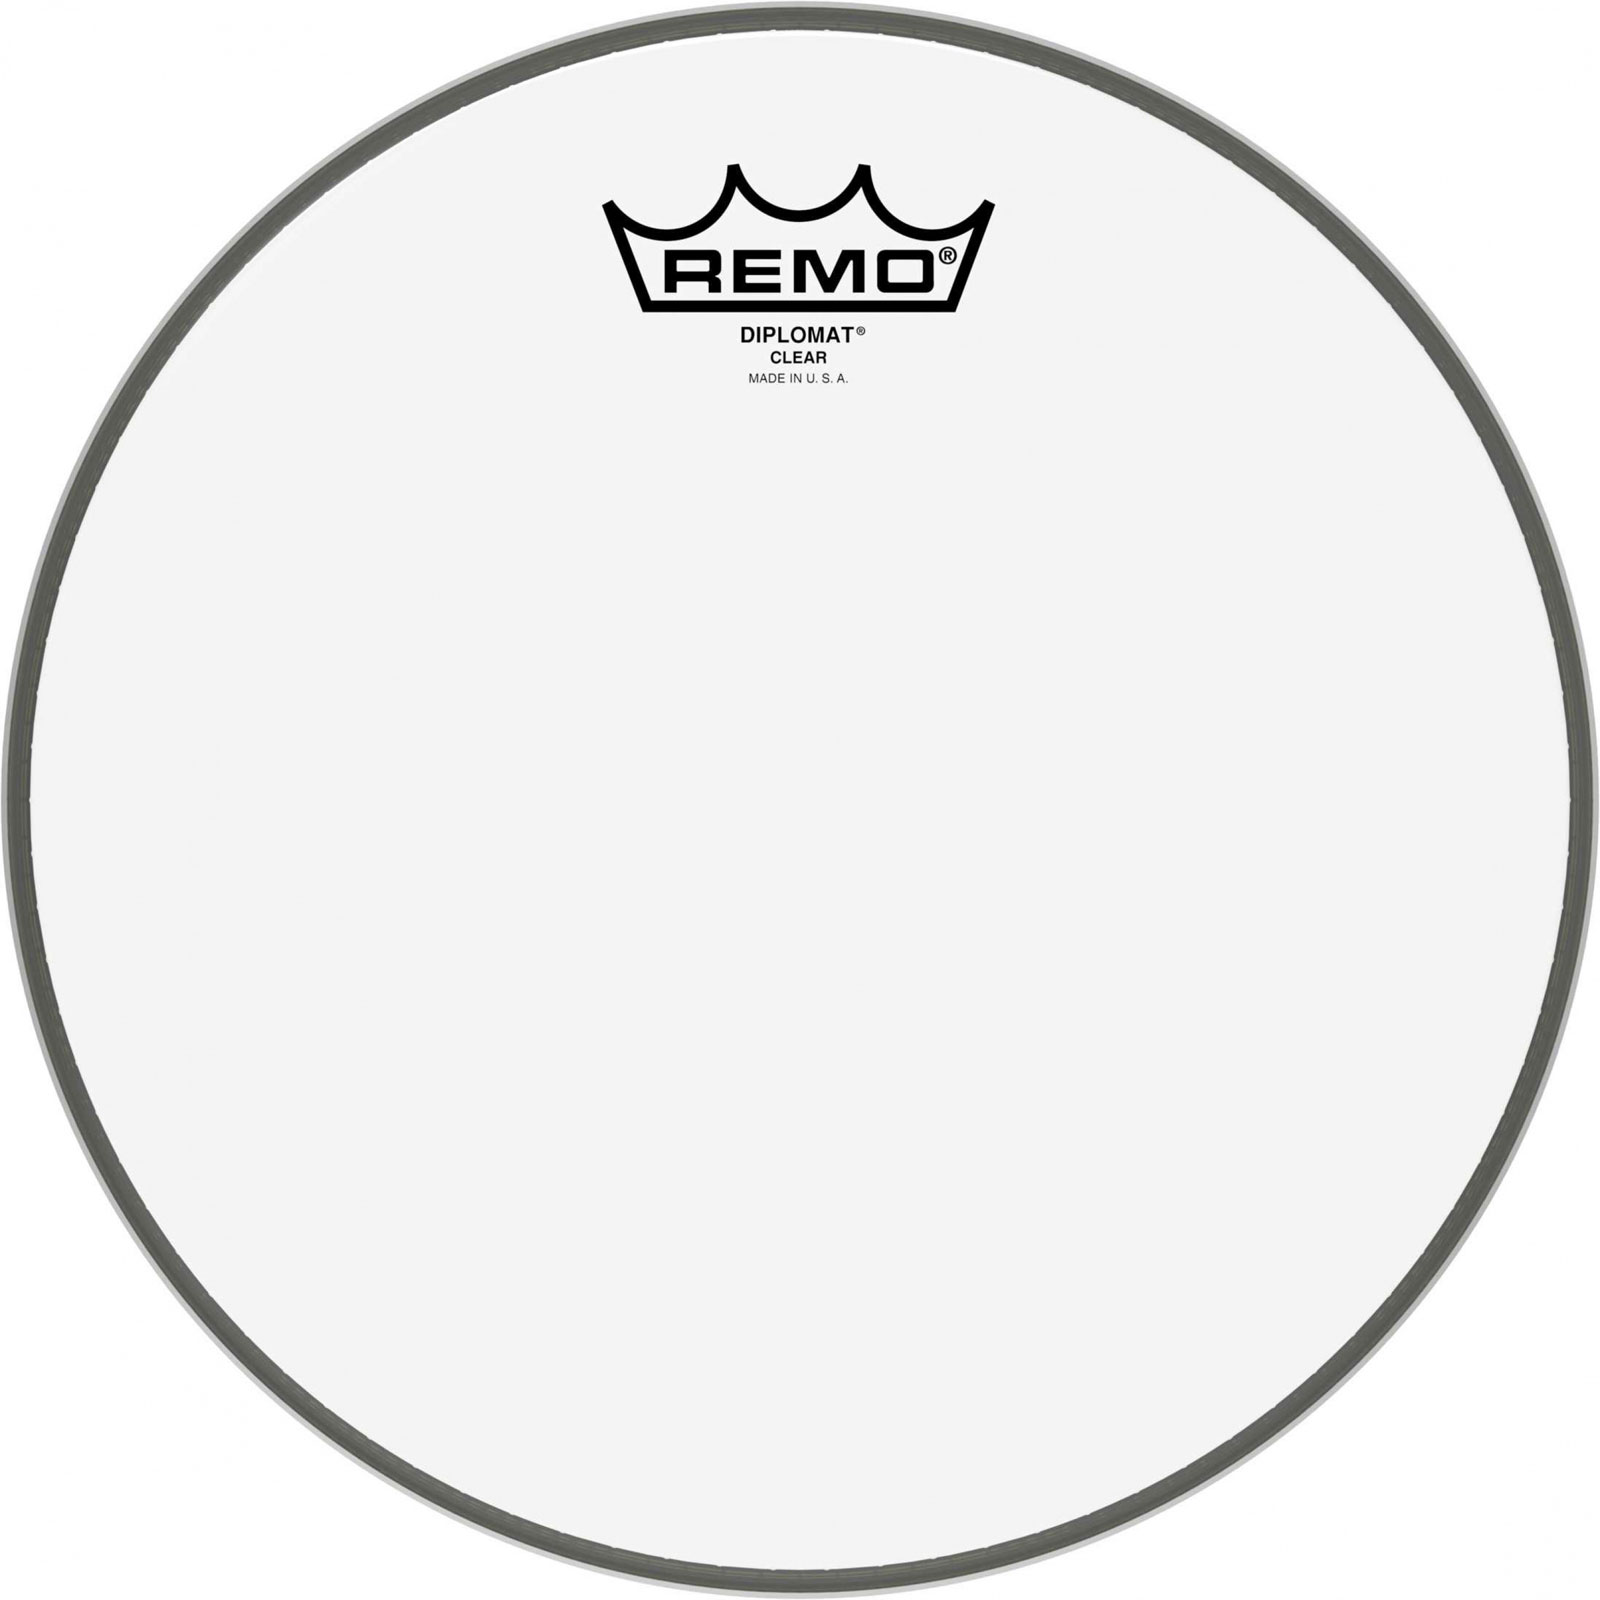 REMO BD-0310-00 - DIPLOMAT CLEAR 10